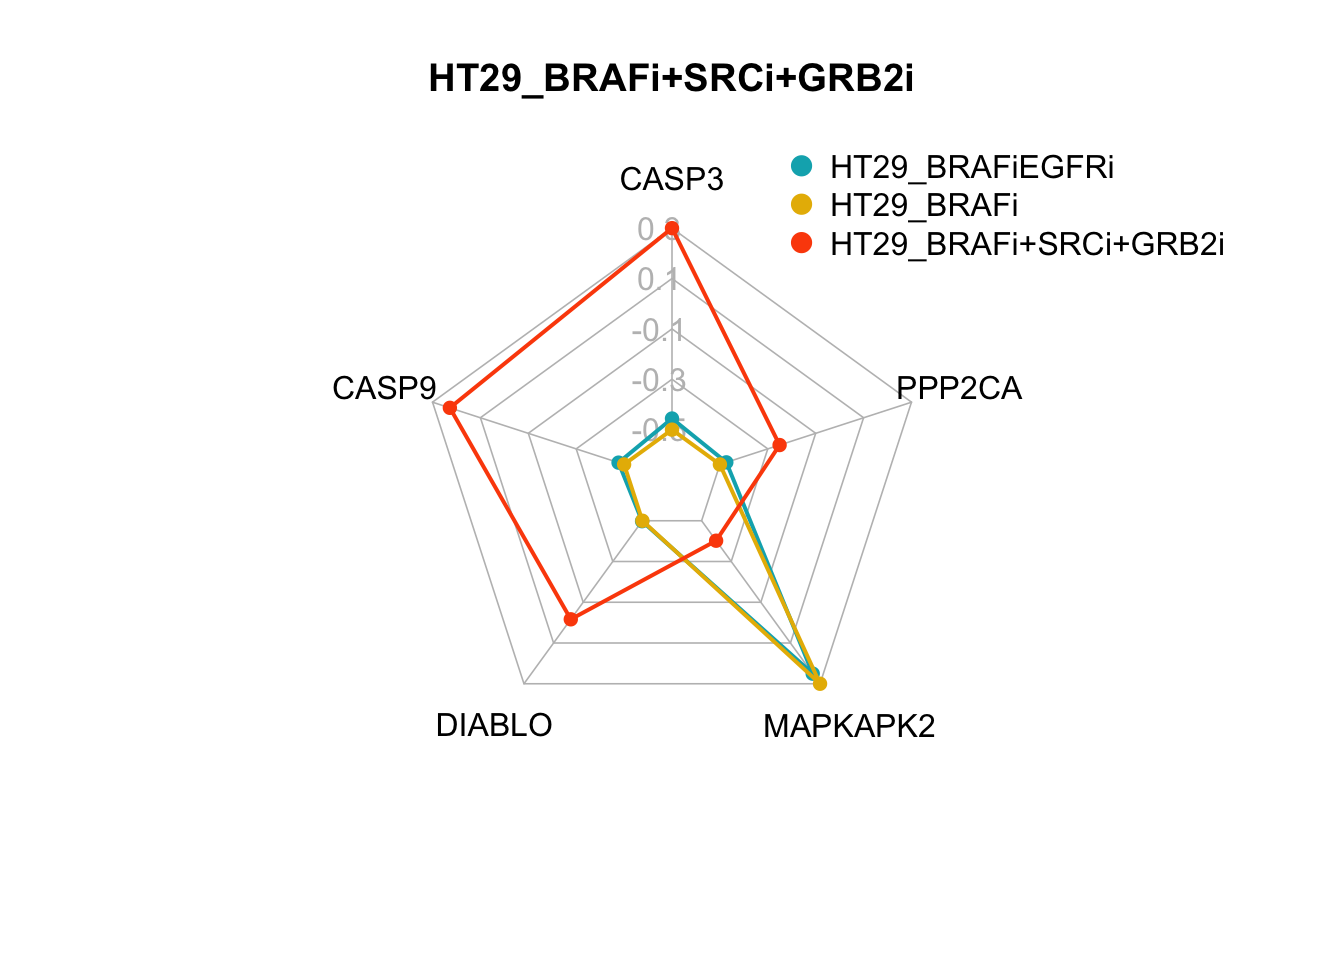 radar charts of the steady-state values of apoptosis internal-marker nodes for HT29_BRAFi+SRCi_TSCovr and HT29_BRAFi+SRCi_GRB2i